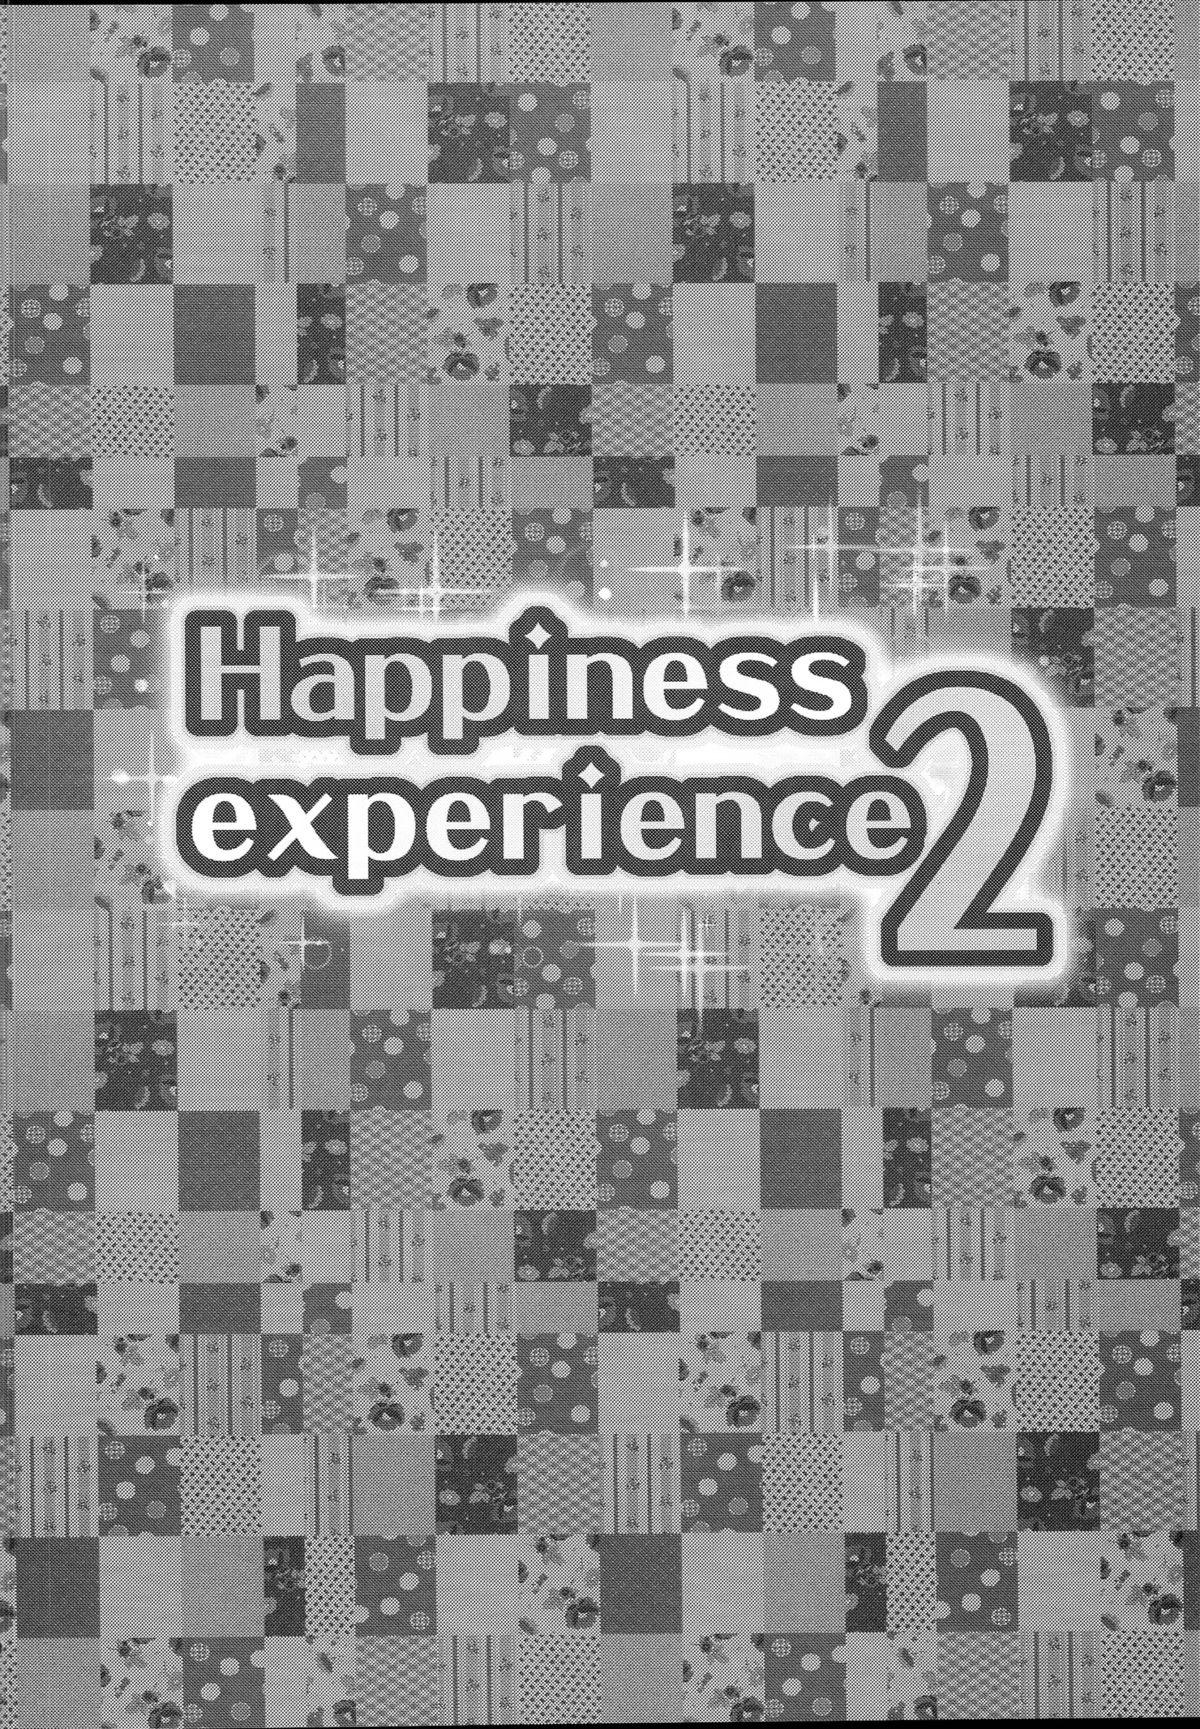 Happiness experience2 2